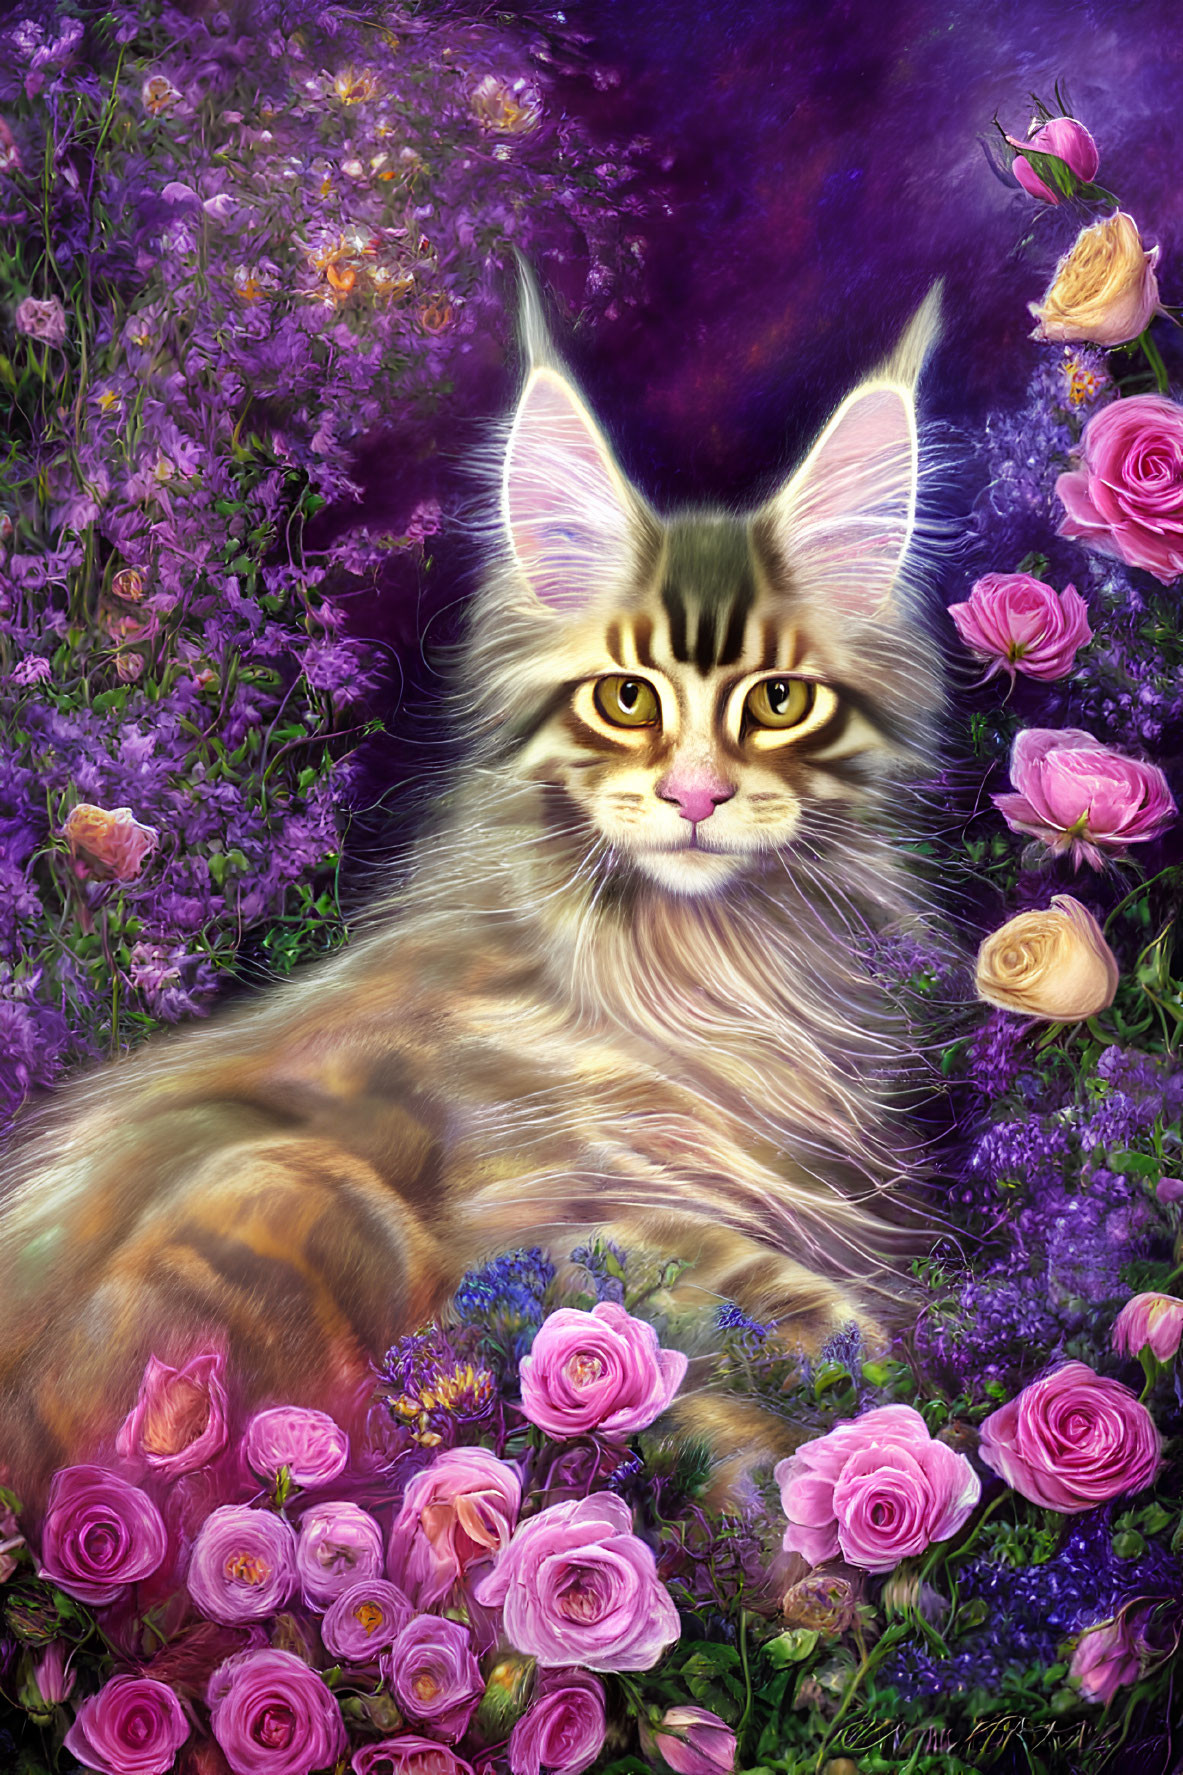 Majestic cat with whiskers and flowers in vibrant illustration